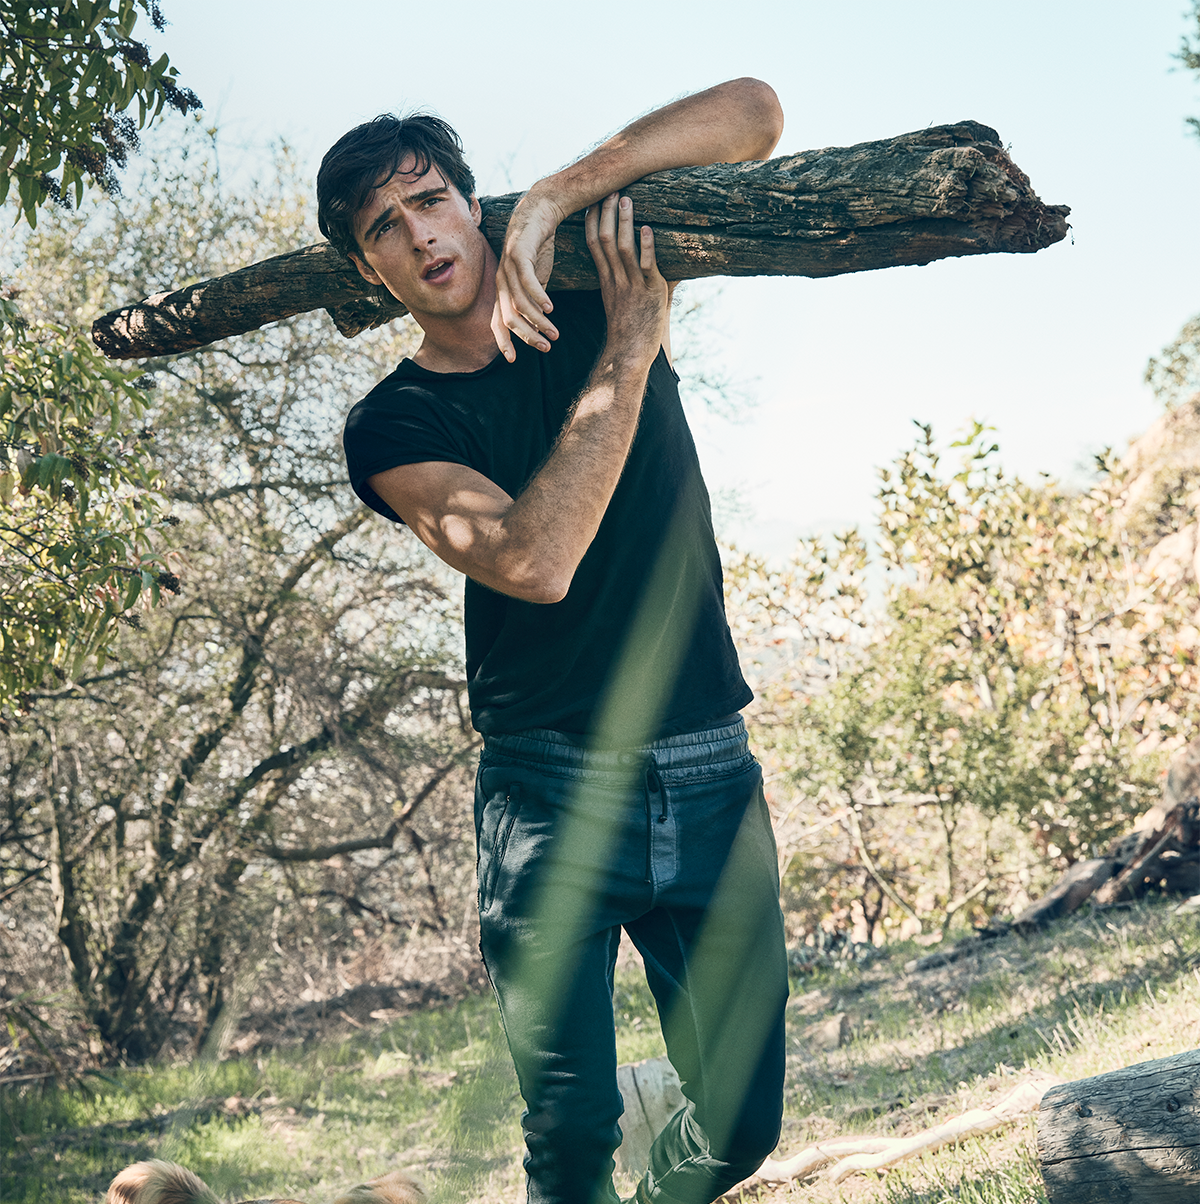 Jacob Elordi Is Young, Talented, and Figuring It Out